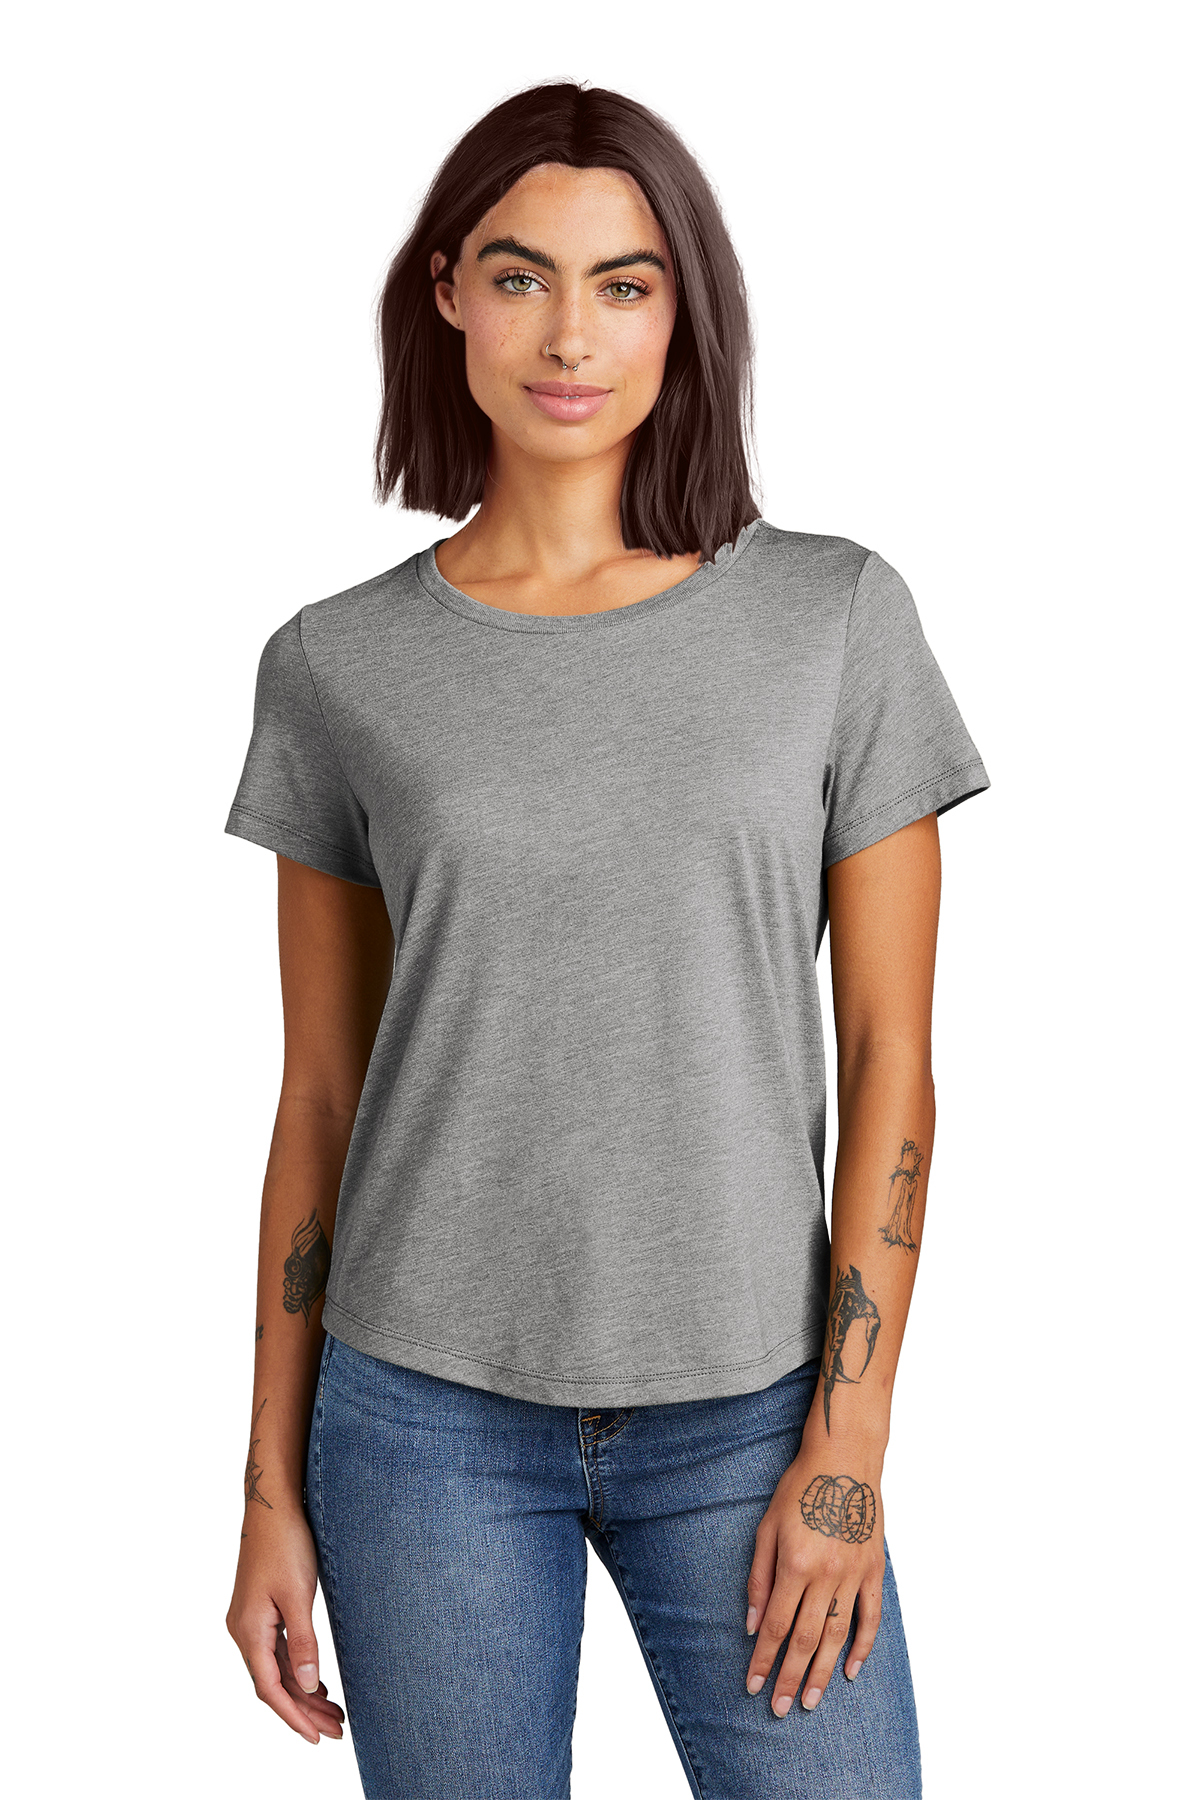 Allmade Women’s Relaxed Tri-Blend Scoop Neck Tee | Product | Company ...